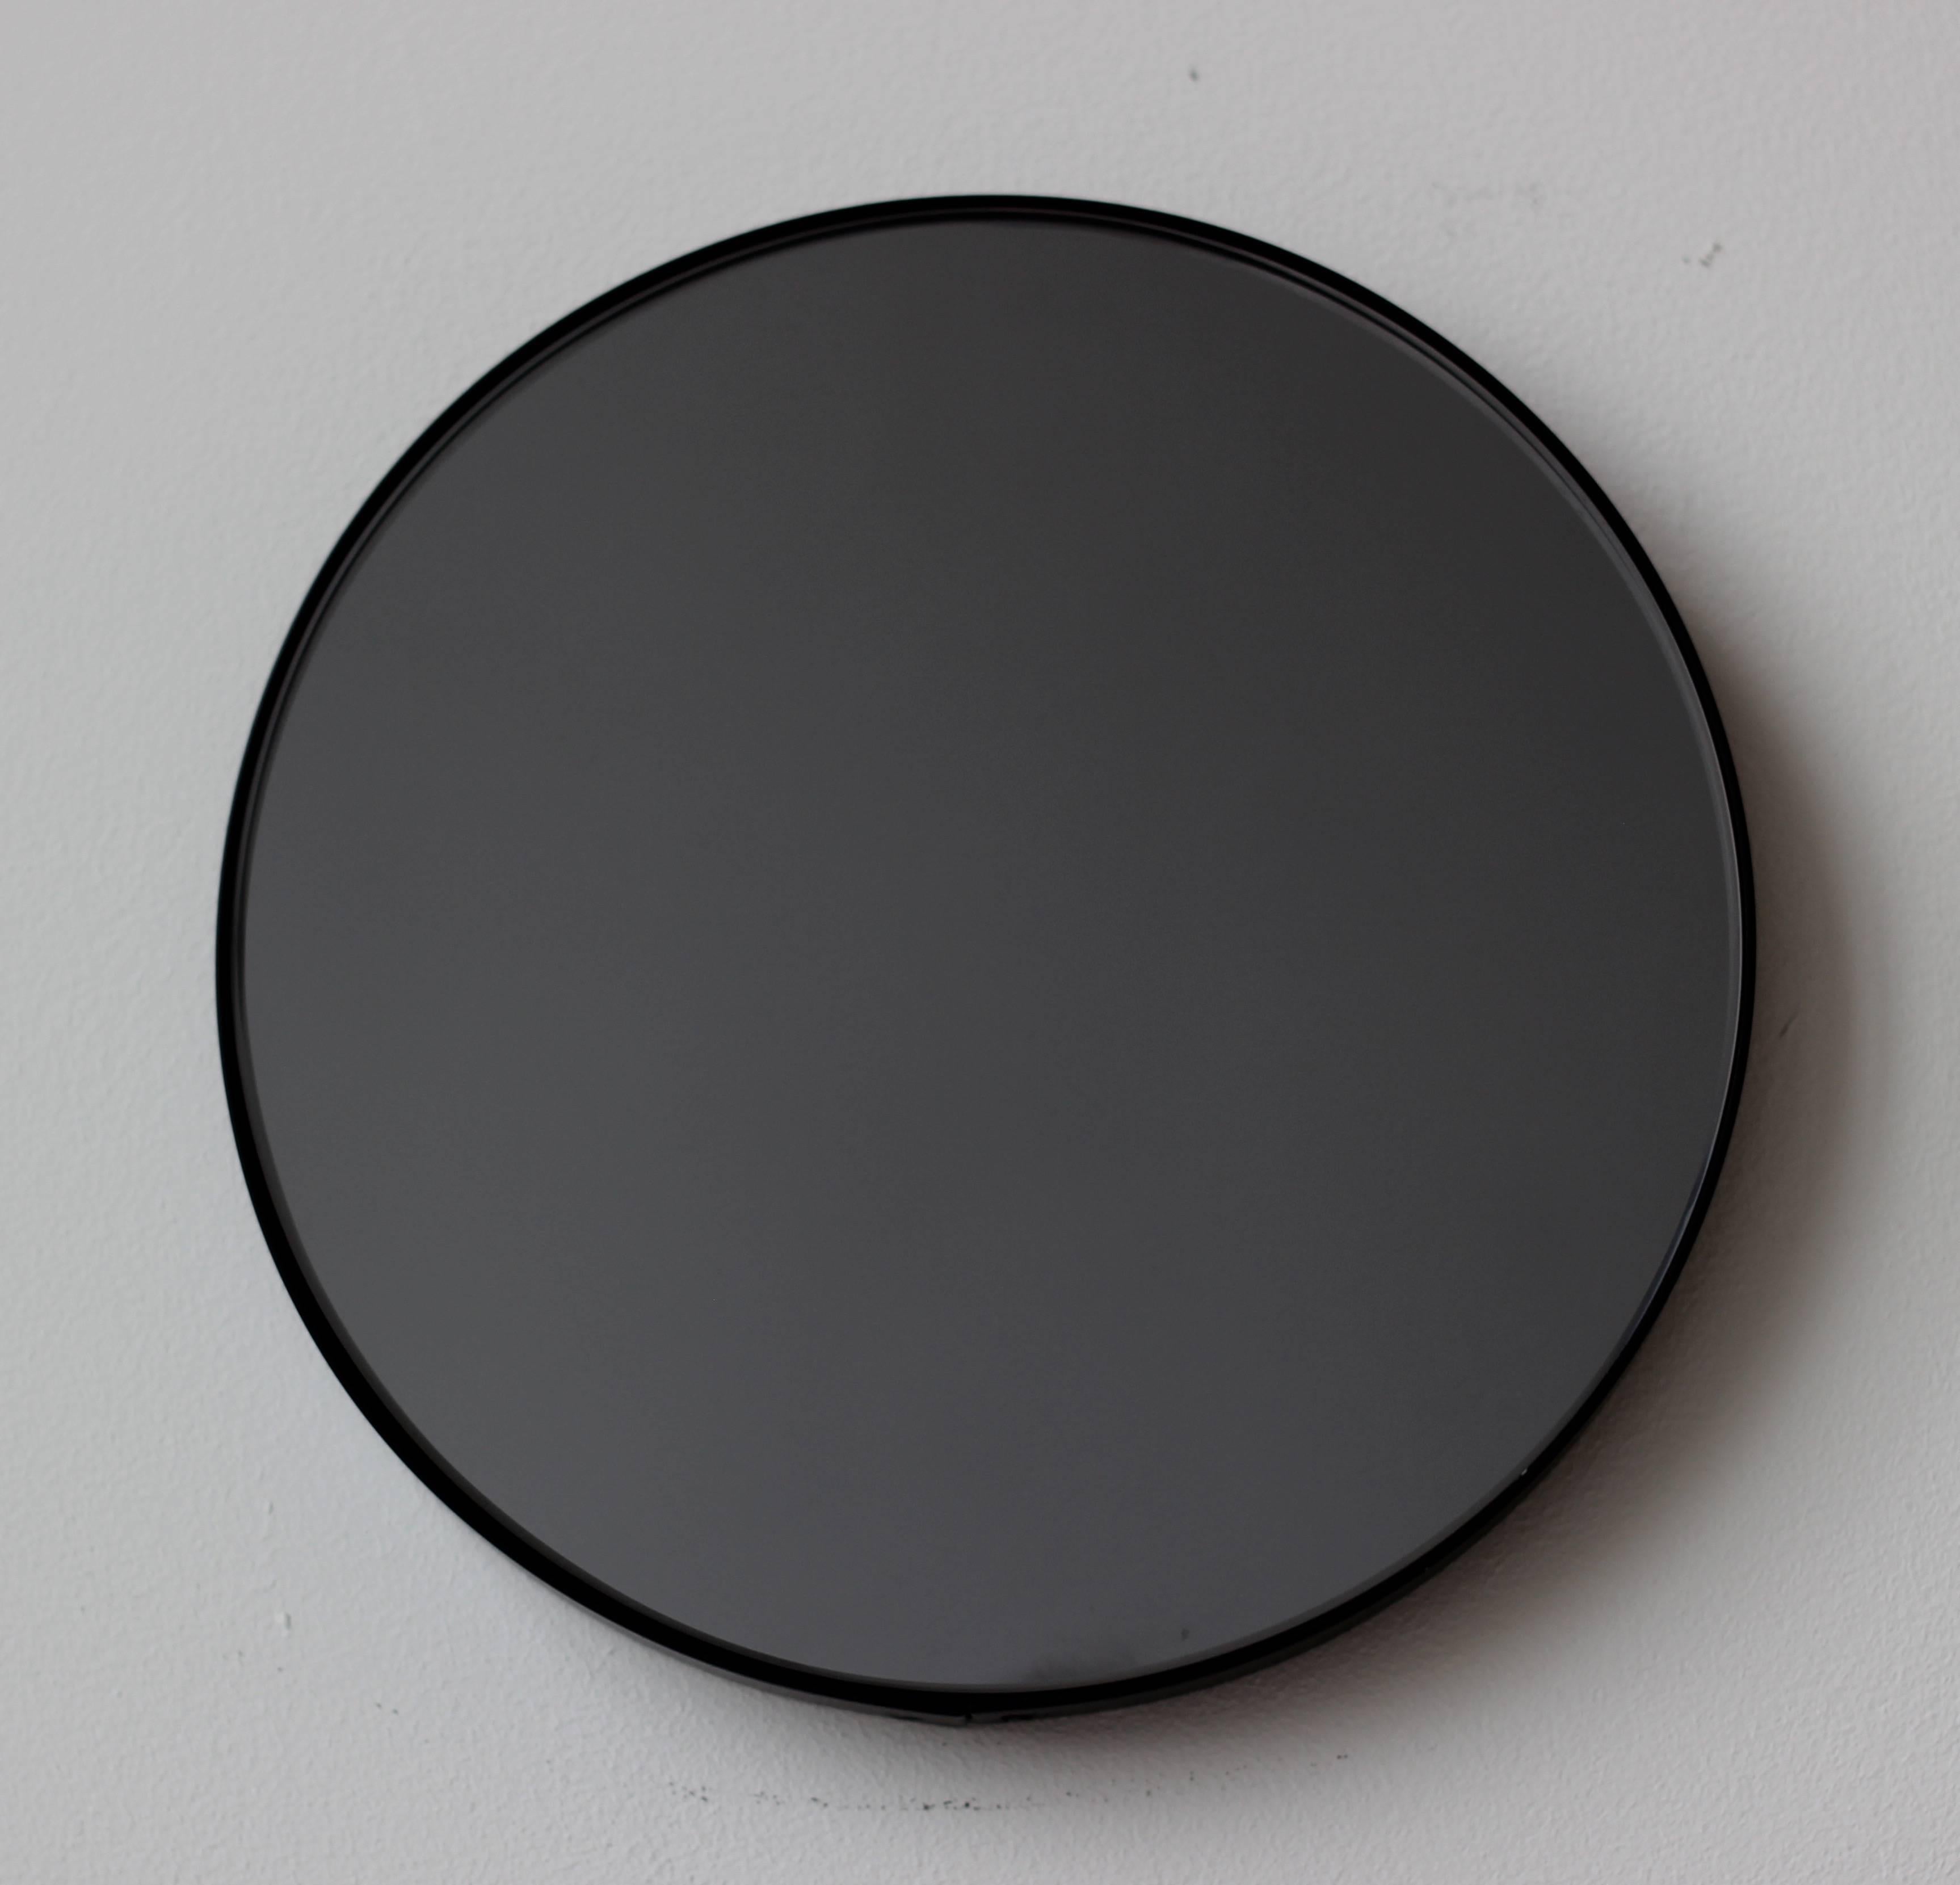 Contemporary Orbis™ round black tinted mirror with a minimalist aluminium powder coated black frame. Designed and handcrafted in London, UK.

Medium, large and extra-large mirrors (60, 80 and 100cm) are fitted with an ingenious French cleat (split